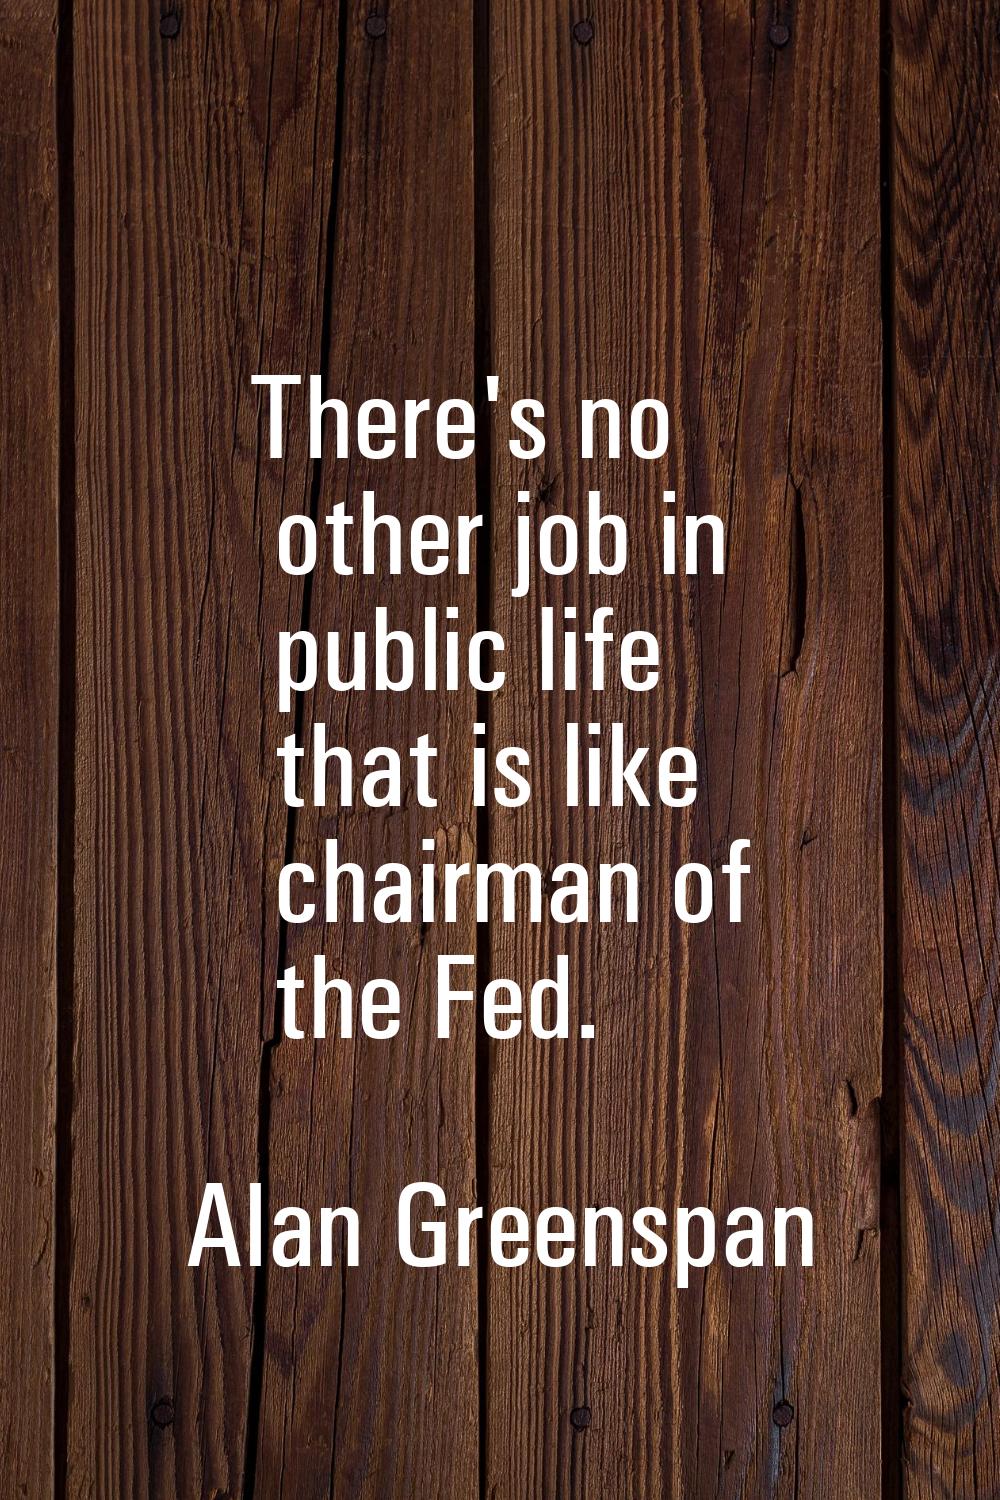 There's no other job in public life that is like chairman of the Fed.